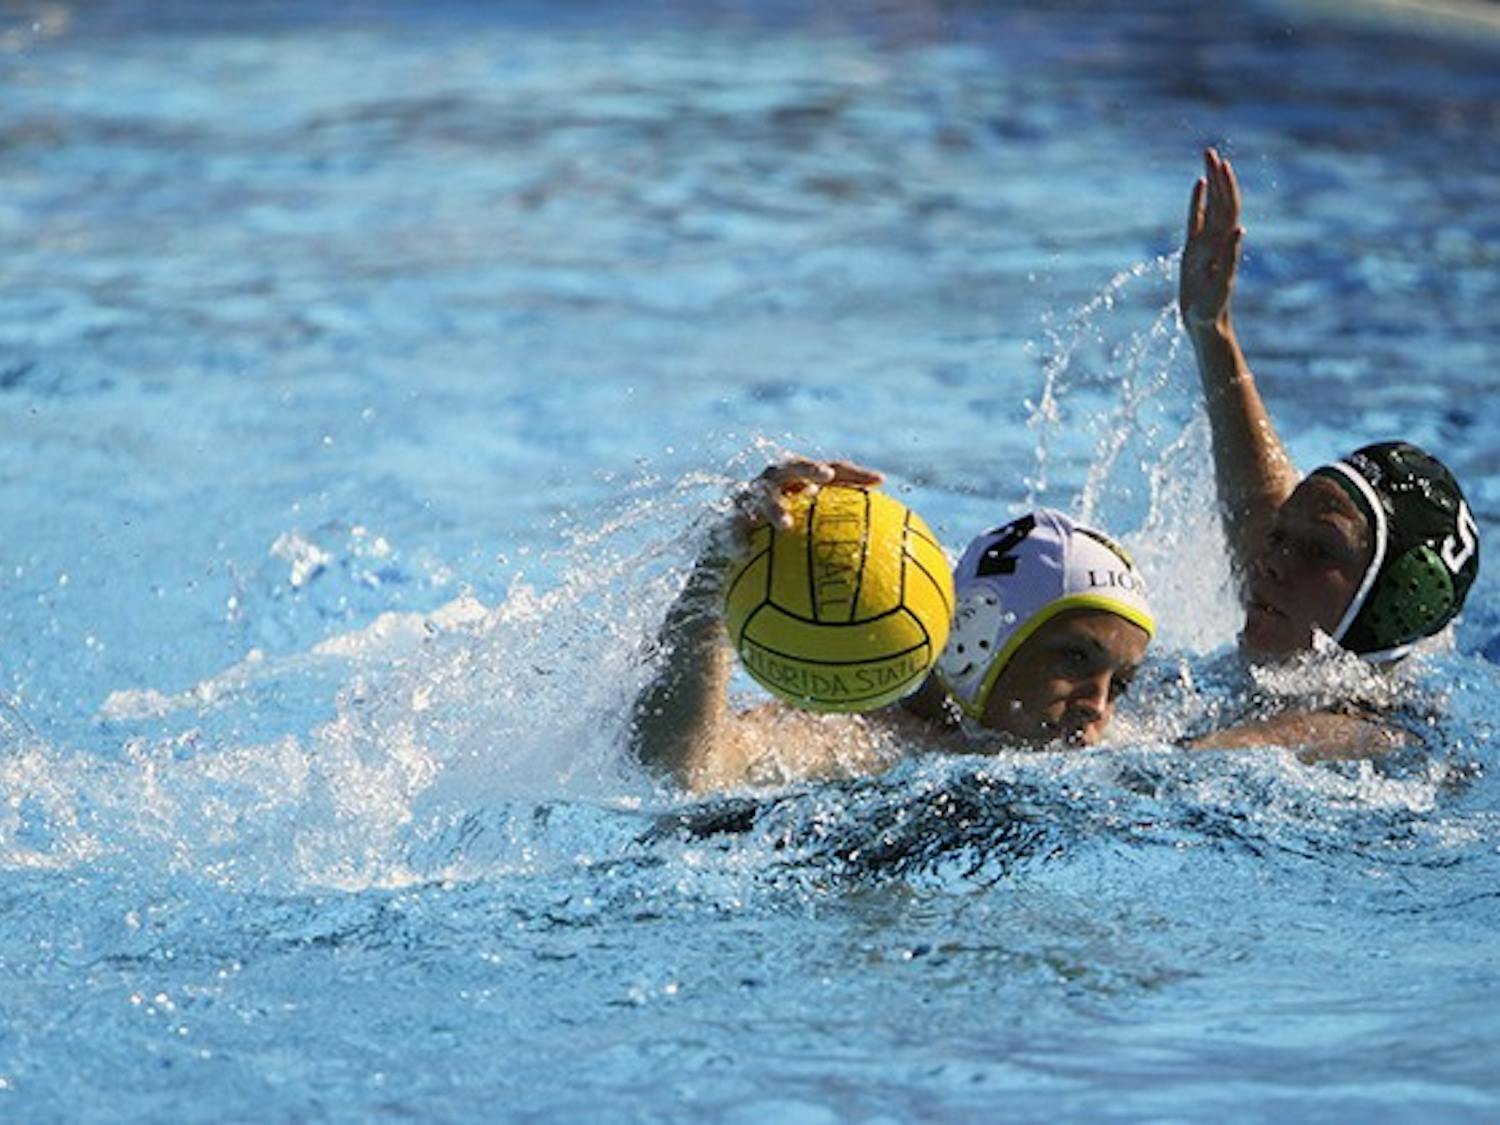 Lisa Rennels '14 defends Lindenwood University's Meghann Kopecky in the women's club water polo's game on Sunday.